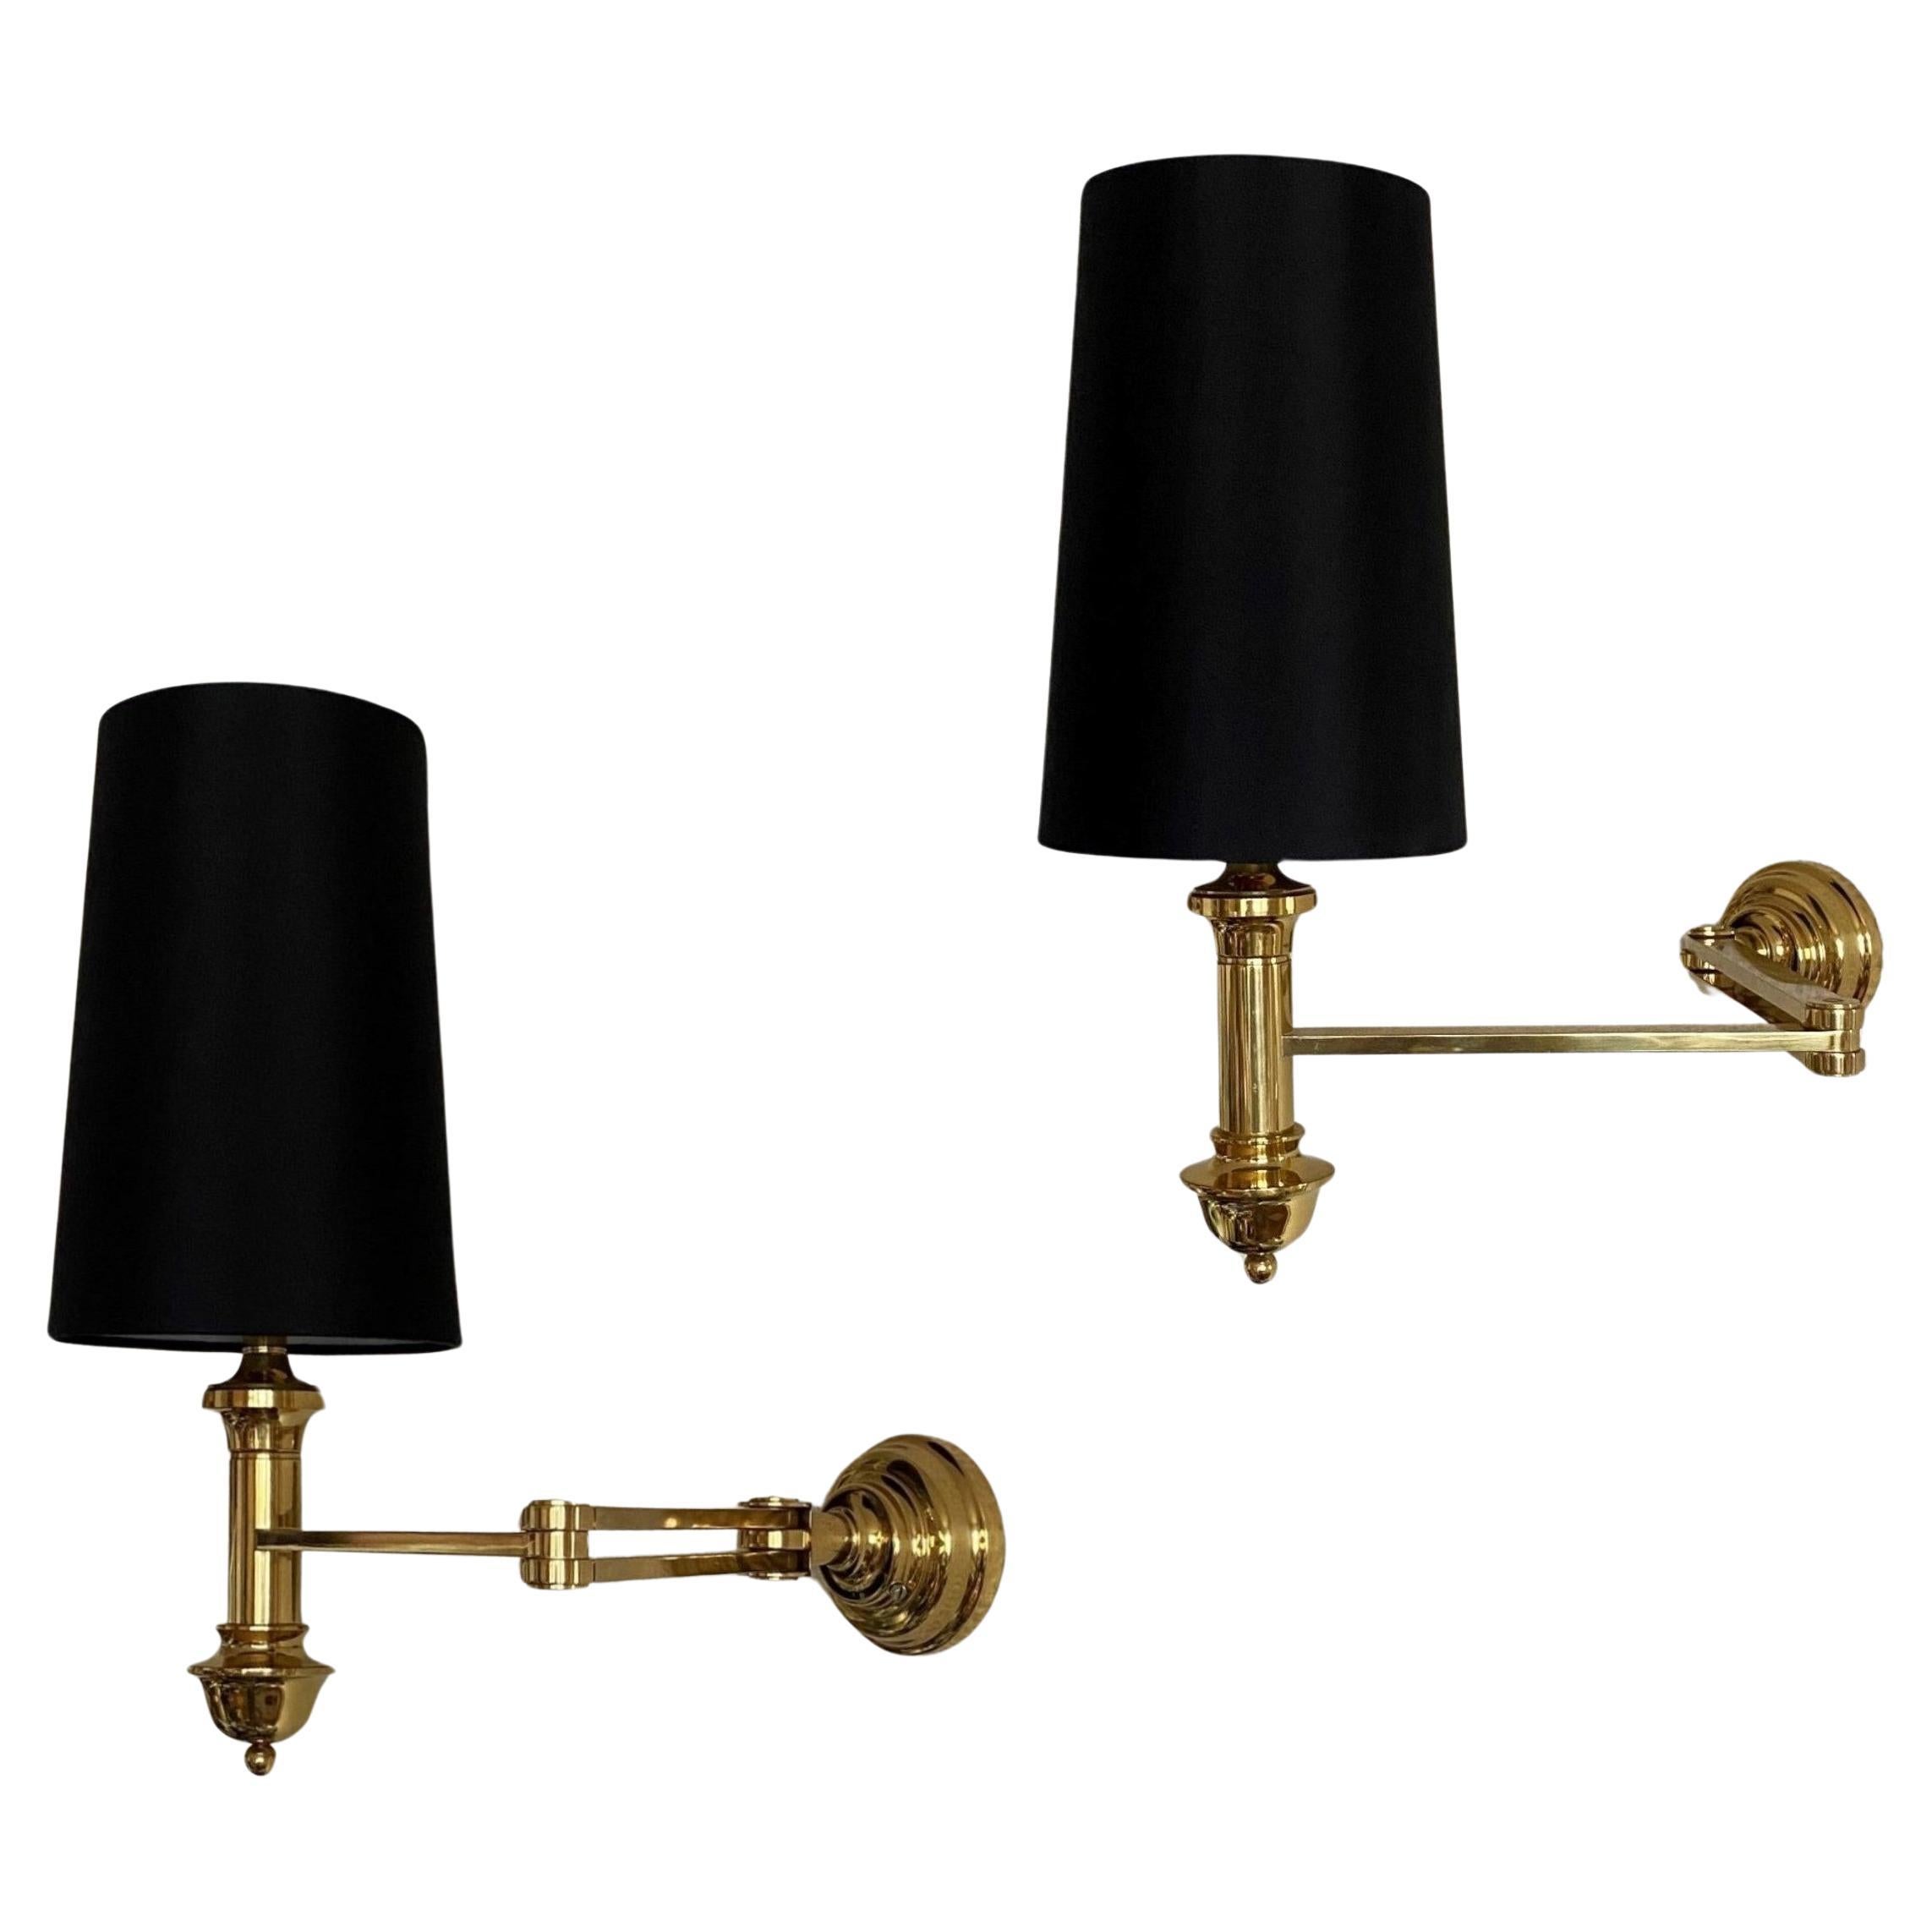 Pair of Maison Jansen Style Brass Swing Arm Wall Sconces Lights, 1960s For Sale